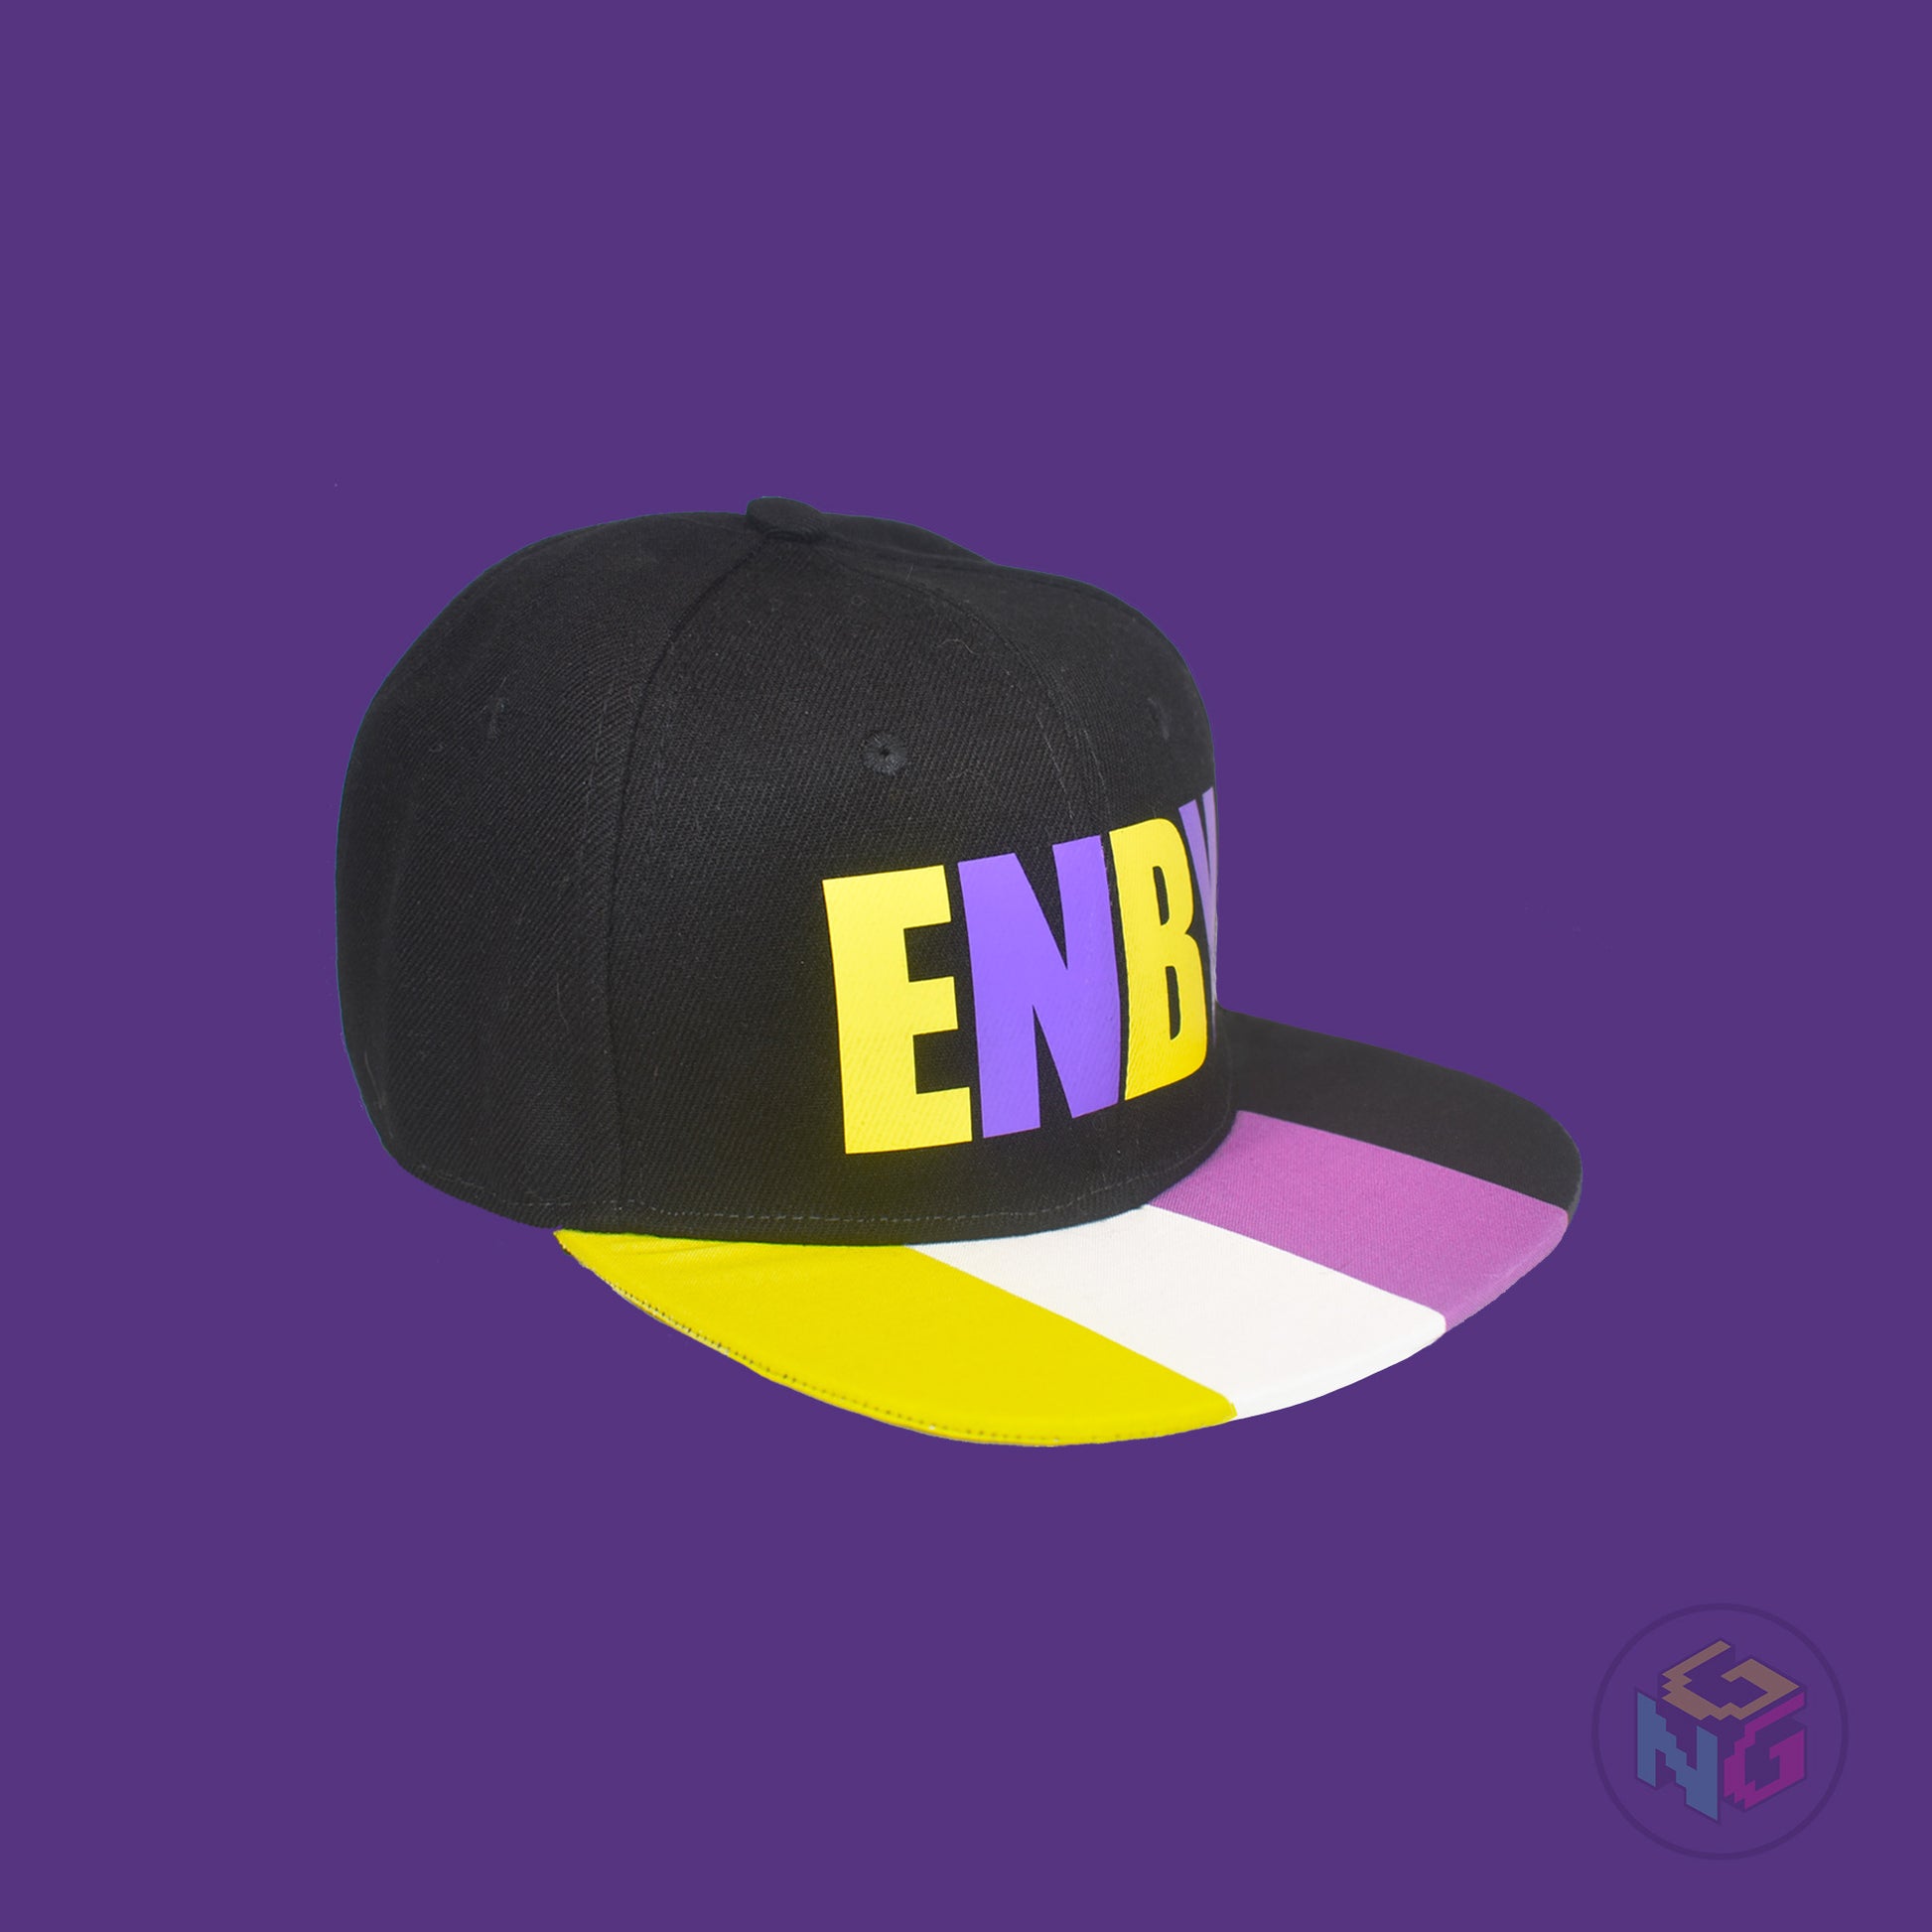 Black flat bill snapback hat. The brim has the nonbinary pride flag on both sides and the front of the hat has the word “ENBY” in yellow and purple letters. Front right view